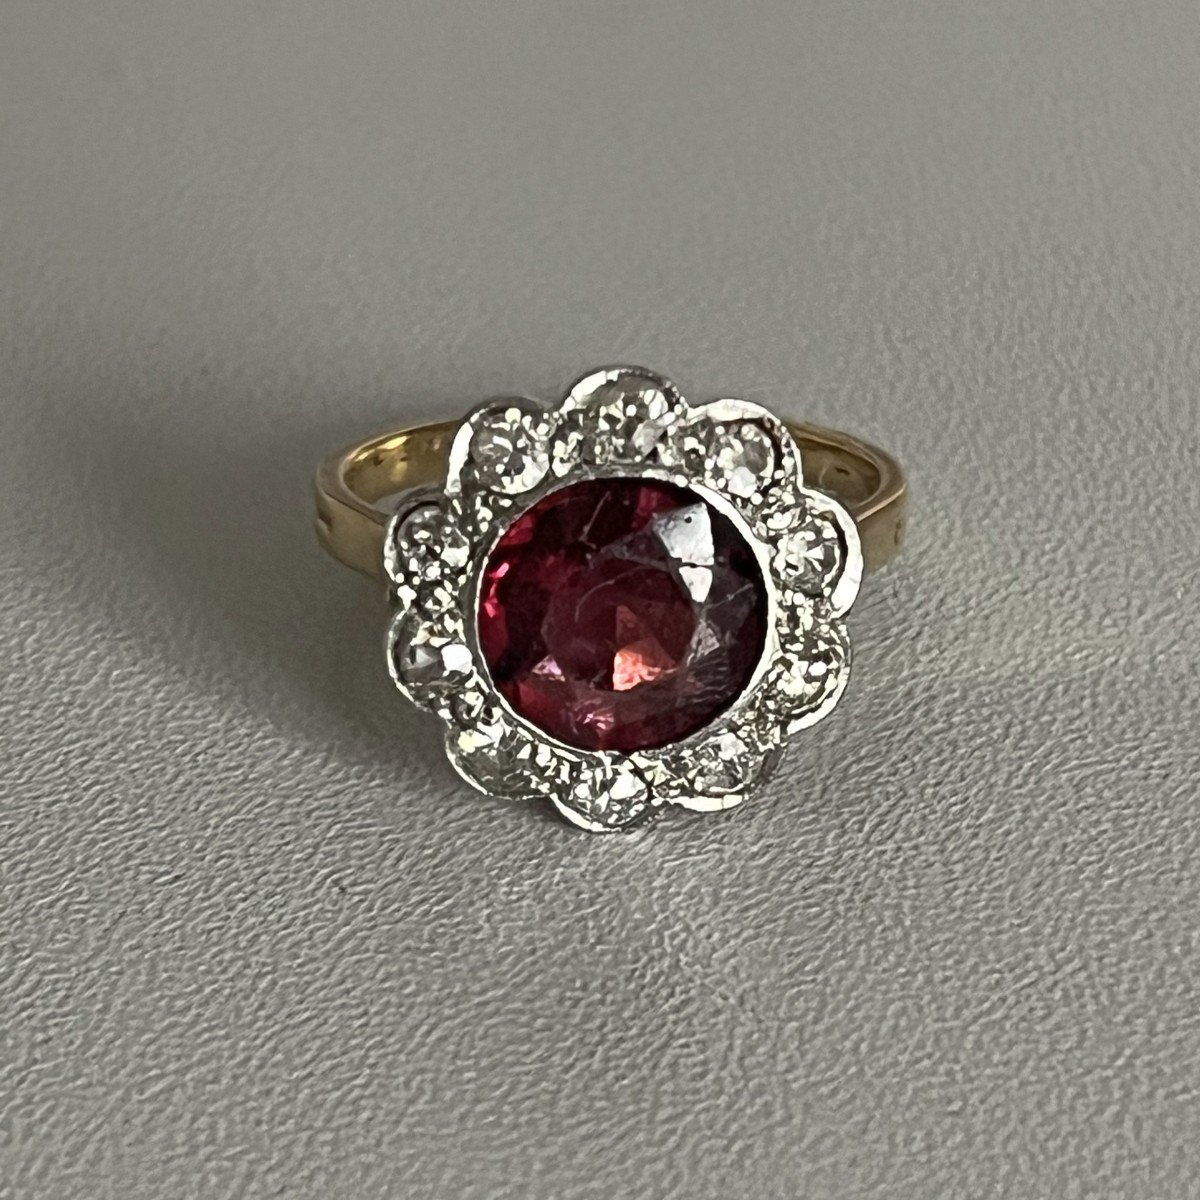 5331- Old Flower Ring Yellow Gold And Gray Garnet Diamonds